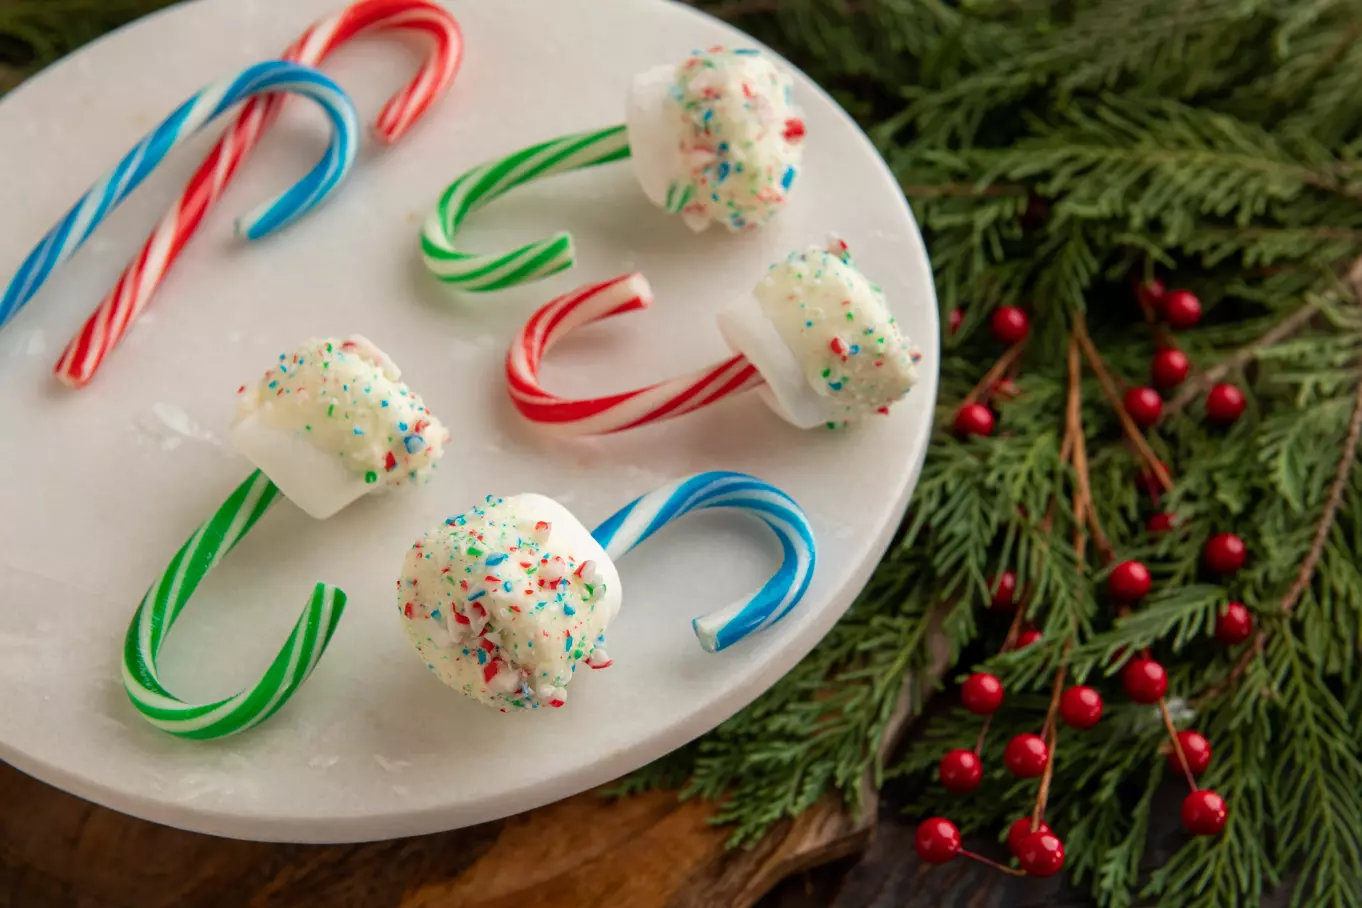 JOLLY RANCHER Candy Canes spread out on decorative plate